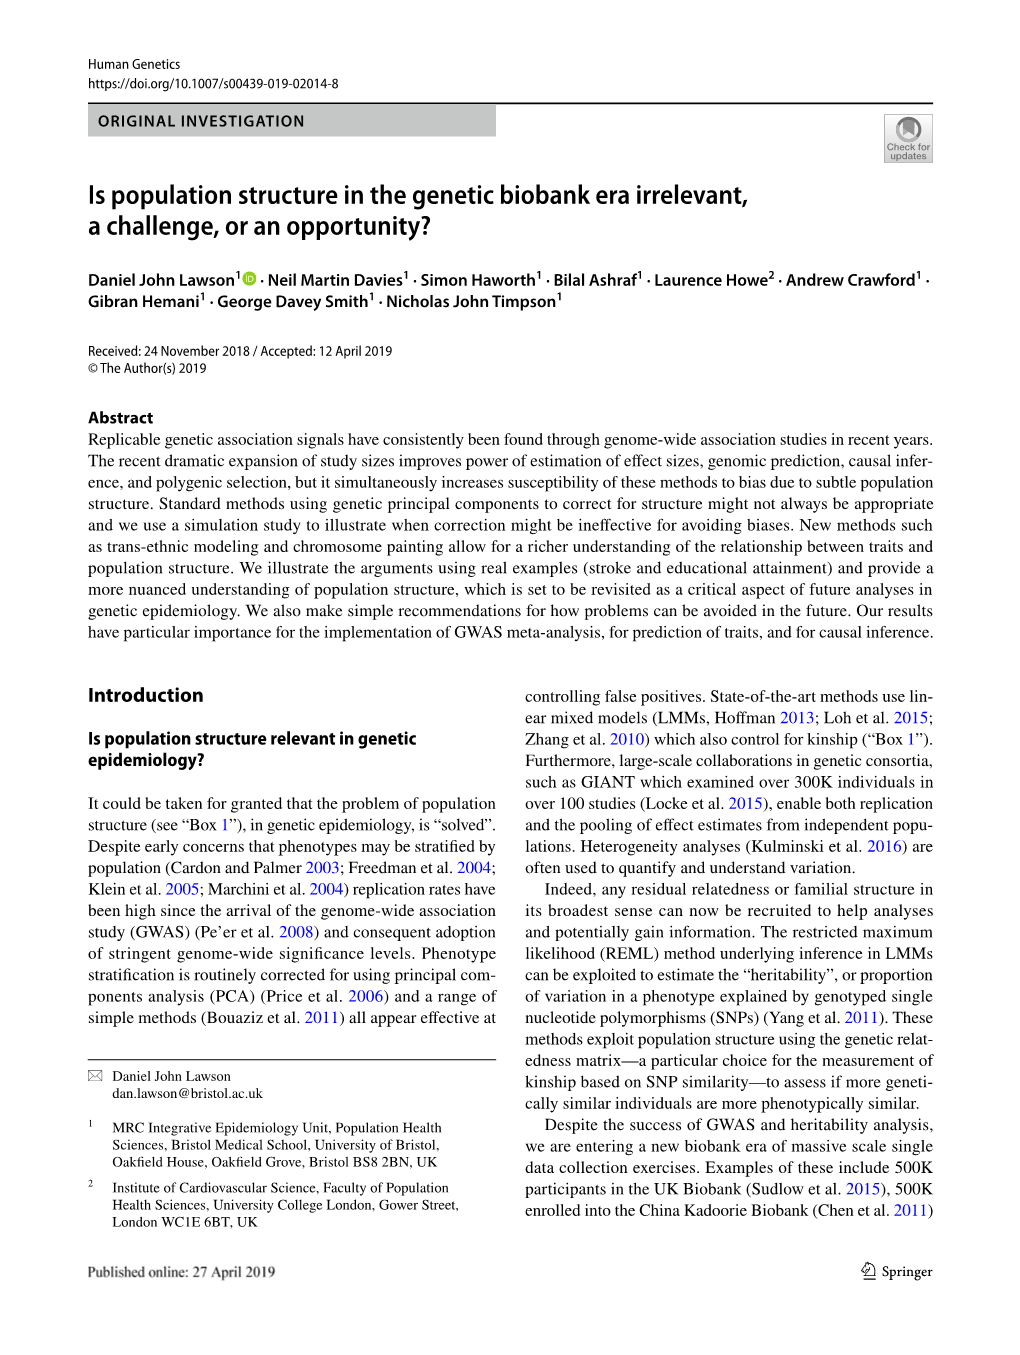 Is Population Structure in the Genetic Biobank Era Irrelevant, a Challenge, Or an Opportunity?